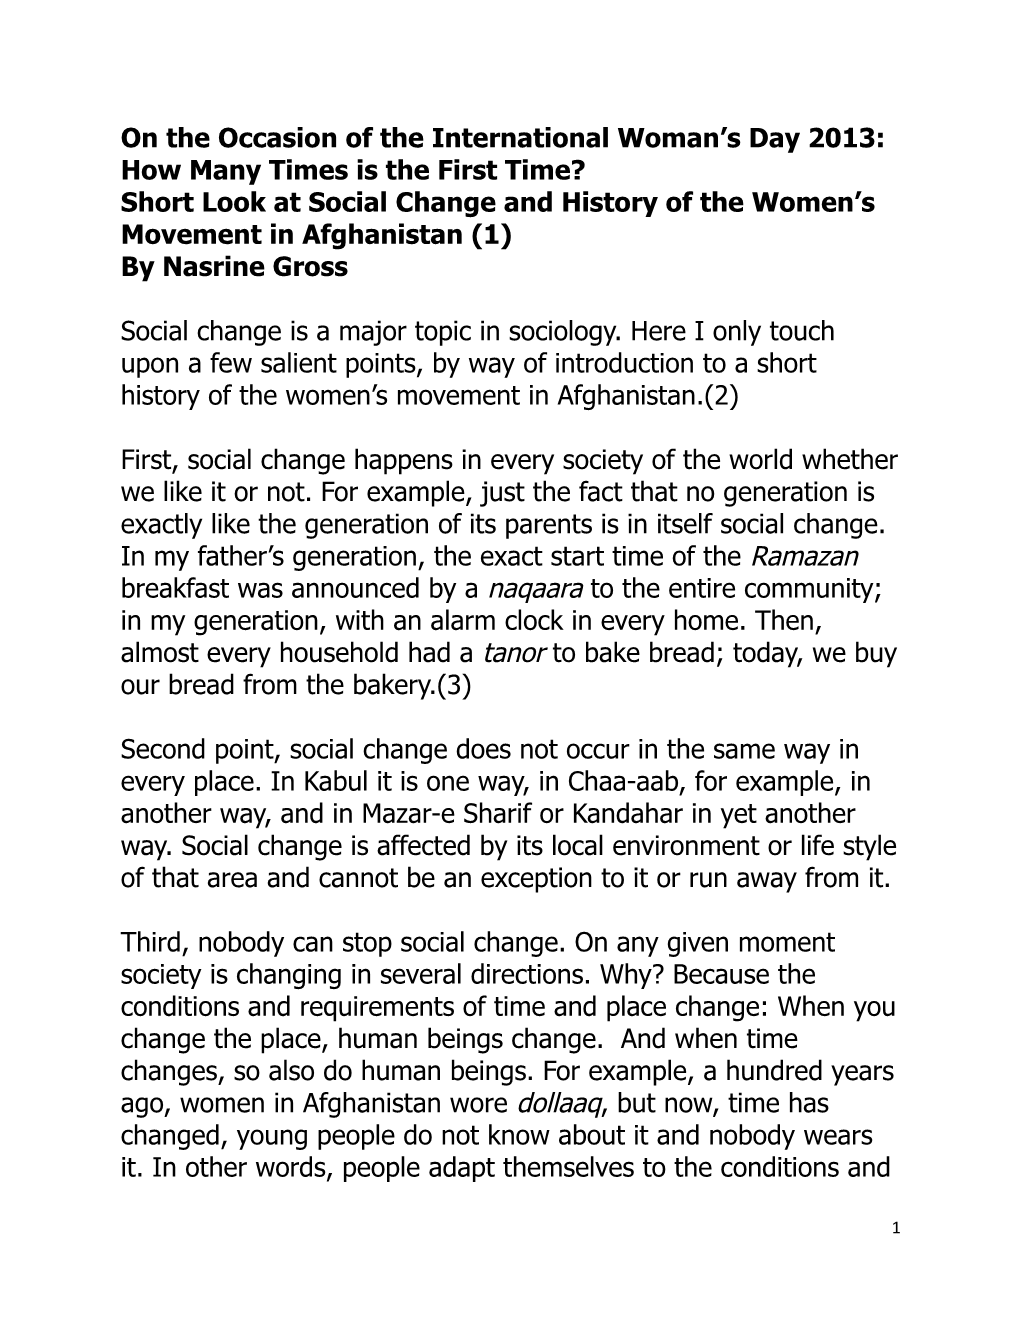 How Many Times Is the First Time? Short Look at Social Change and History of the Women’S Movement in Afghanistan (1) by Nasrine Gross